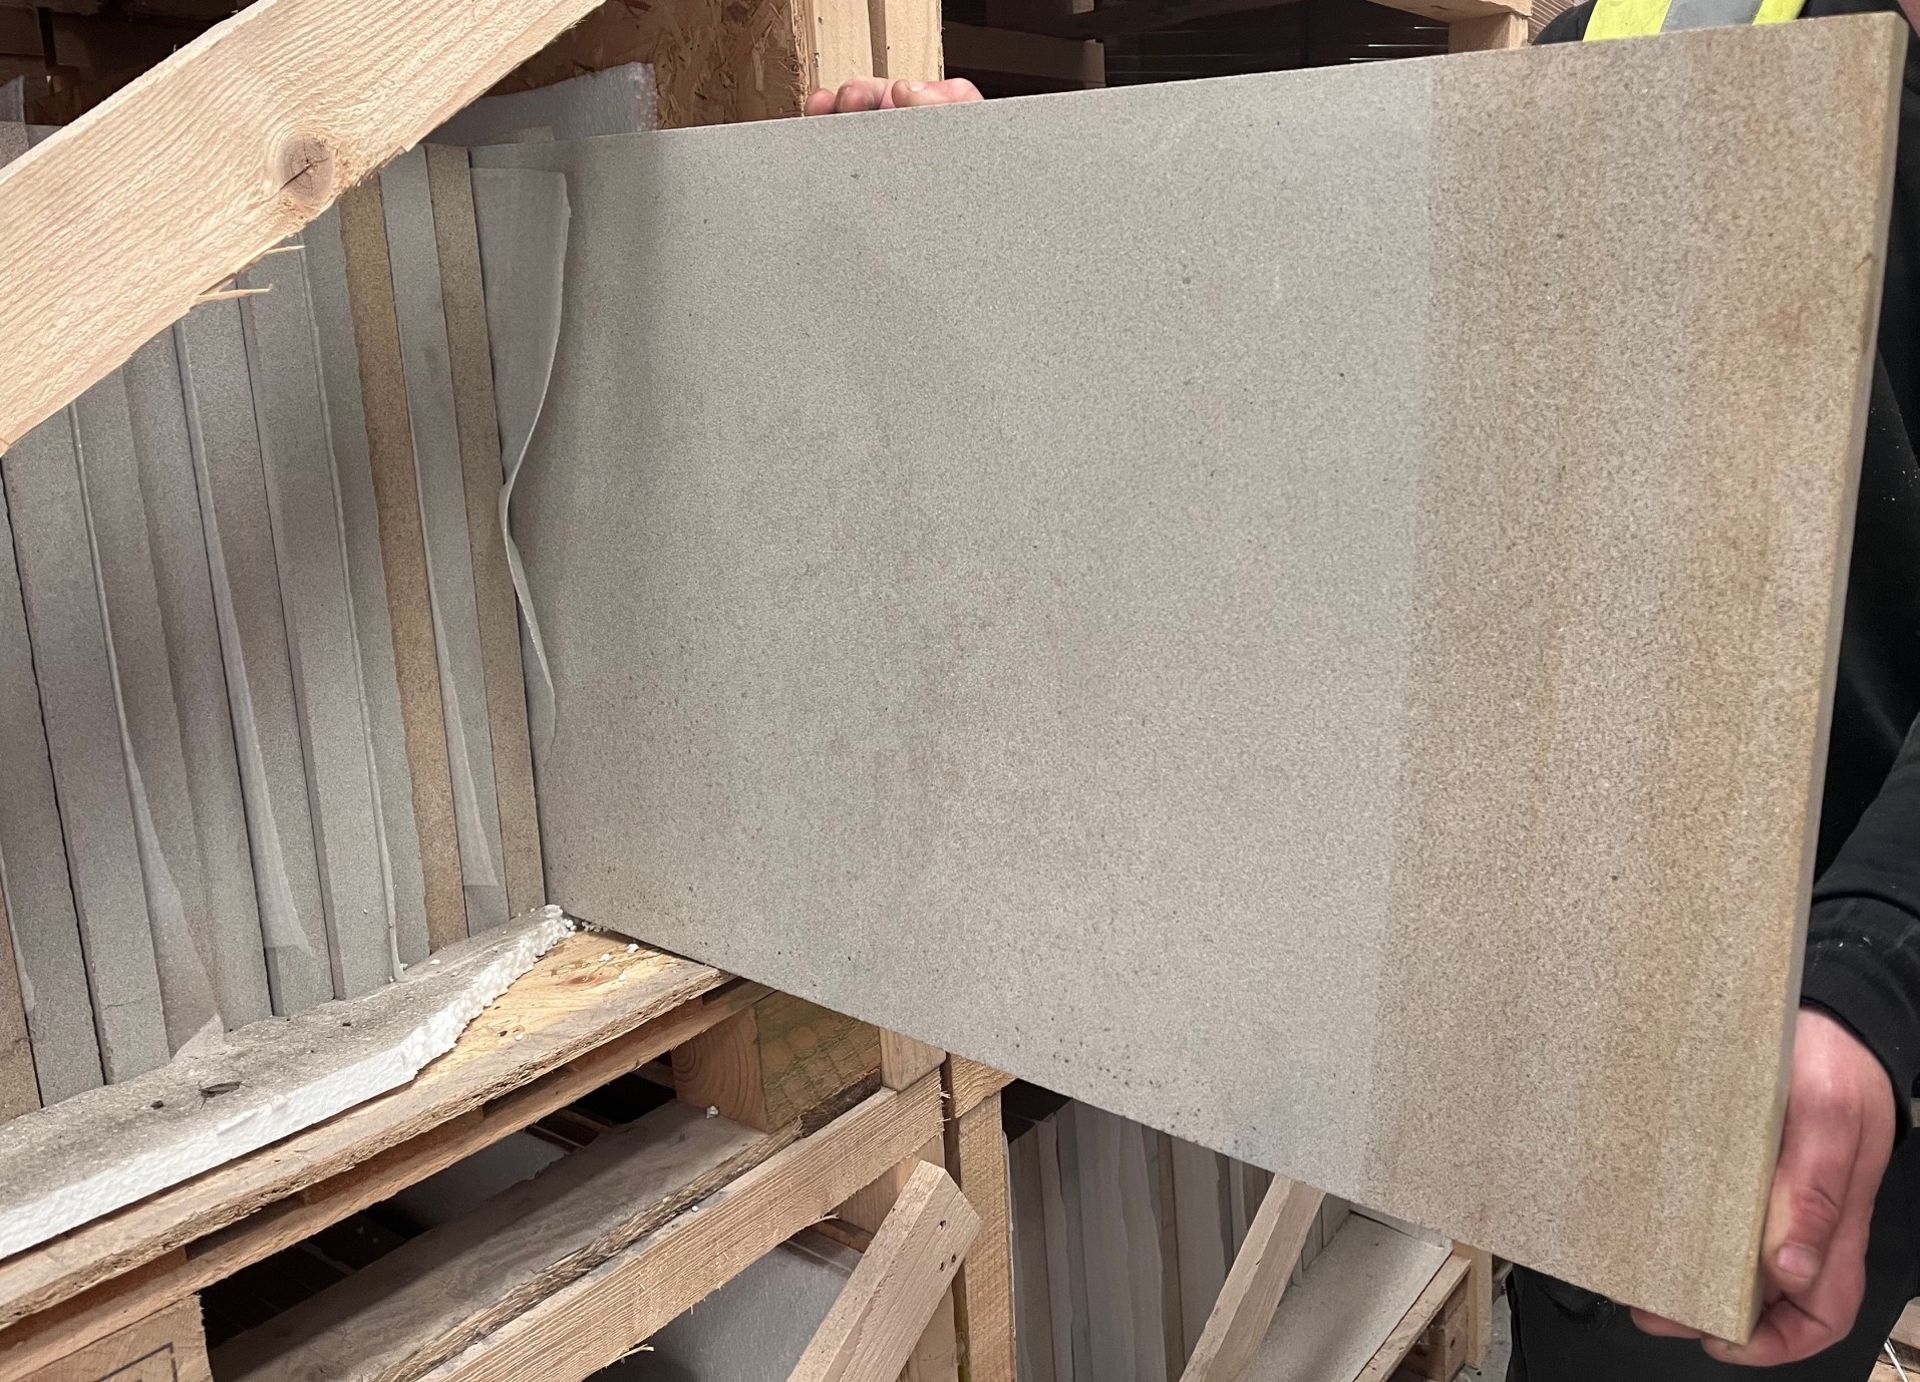 Contents to 3 pallets of BLOCKSTONE MOUSELOW NATURAL SANDSTONE, RUBBED FINISH FACING/PATIO STONE. - Bild 2 aus 8